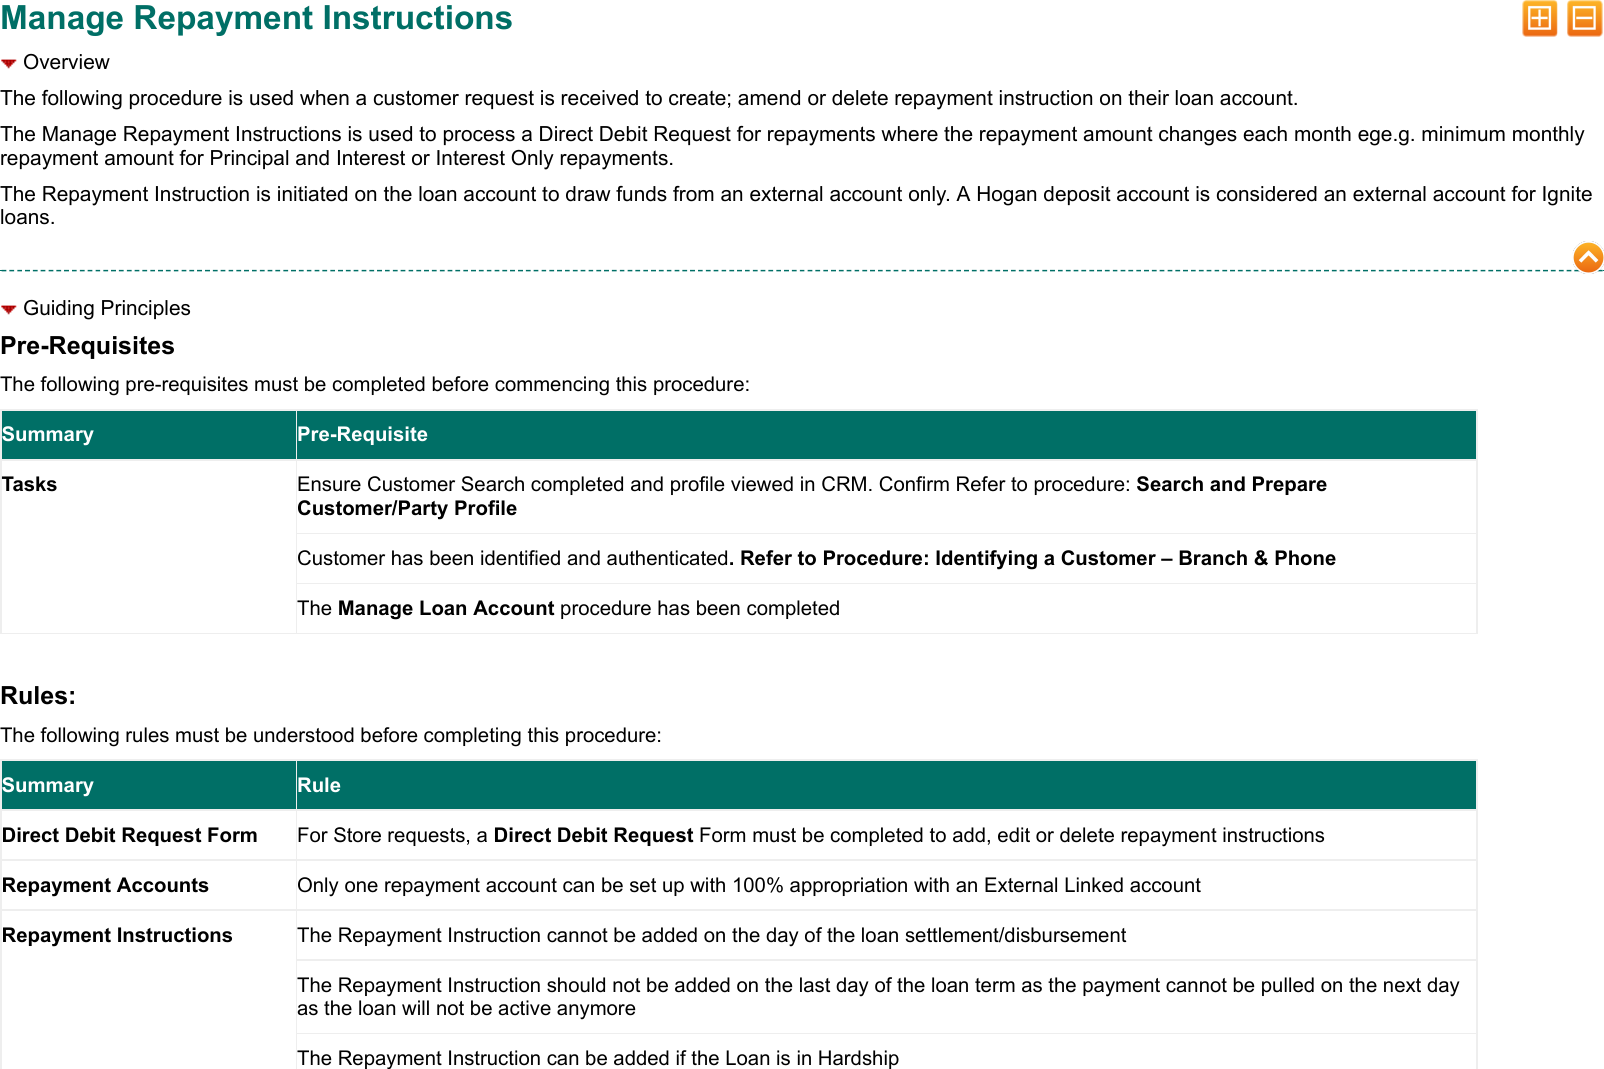 Page 1 of 7 - Manage Repayment Instructions